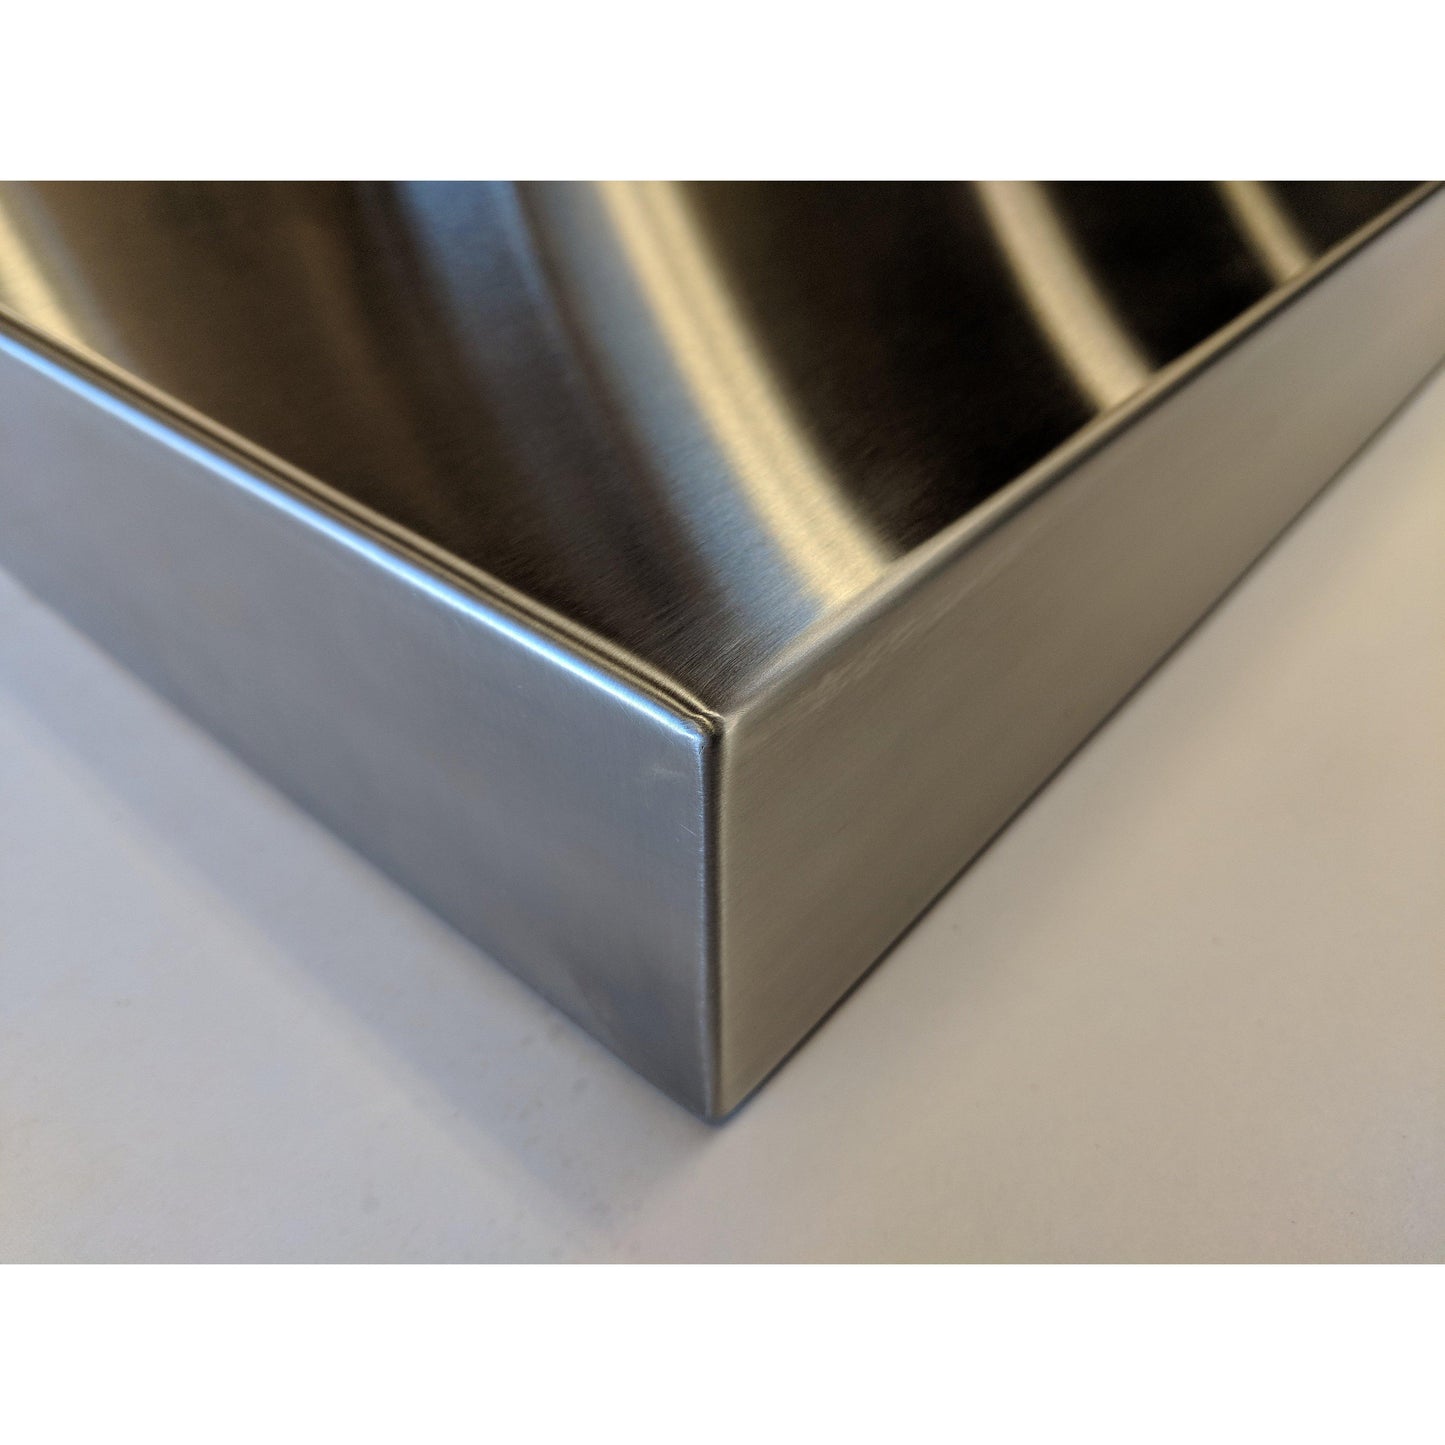 Stainless Steel Floating Shelf 12" Deep for Kitchen, Bathroom and Home-Floating Shelf-Cascade Manufacturing